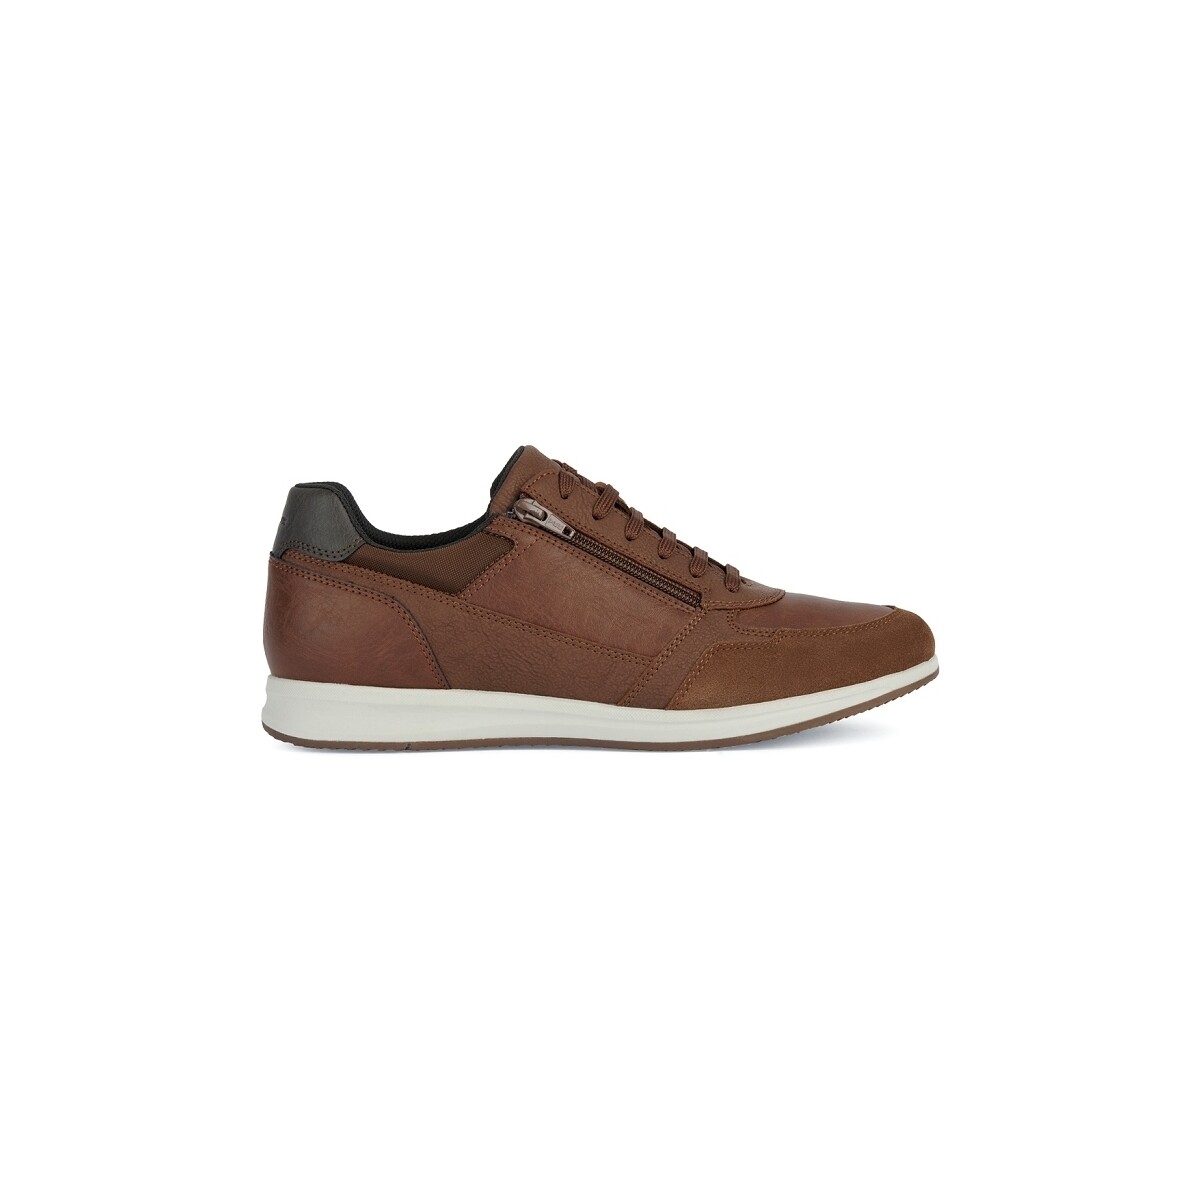 Chaussures Homme Baskets basses Geox U35H5A AVERY Marron